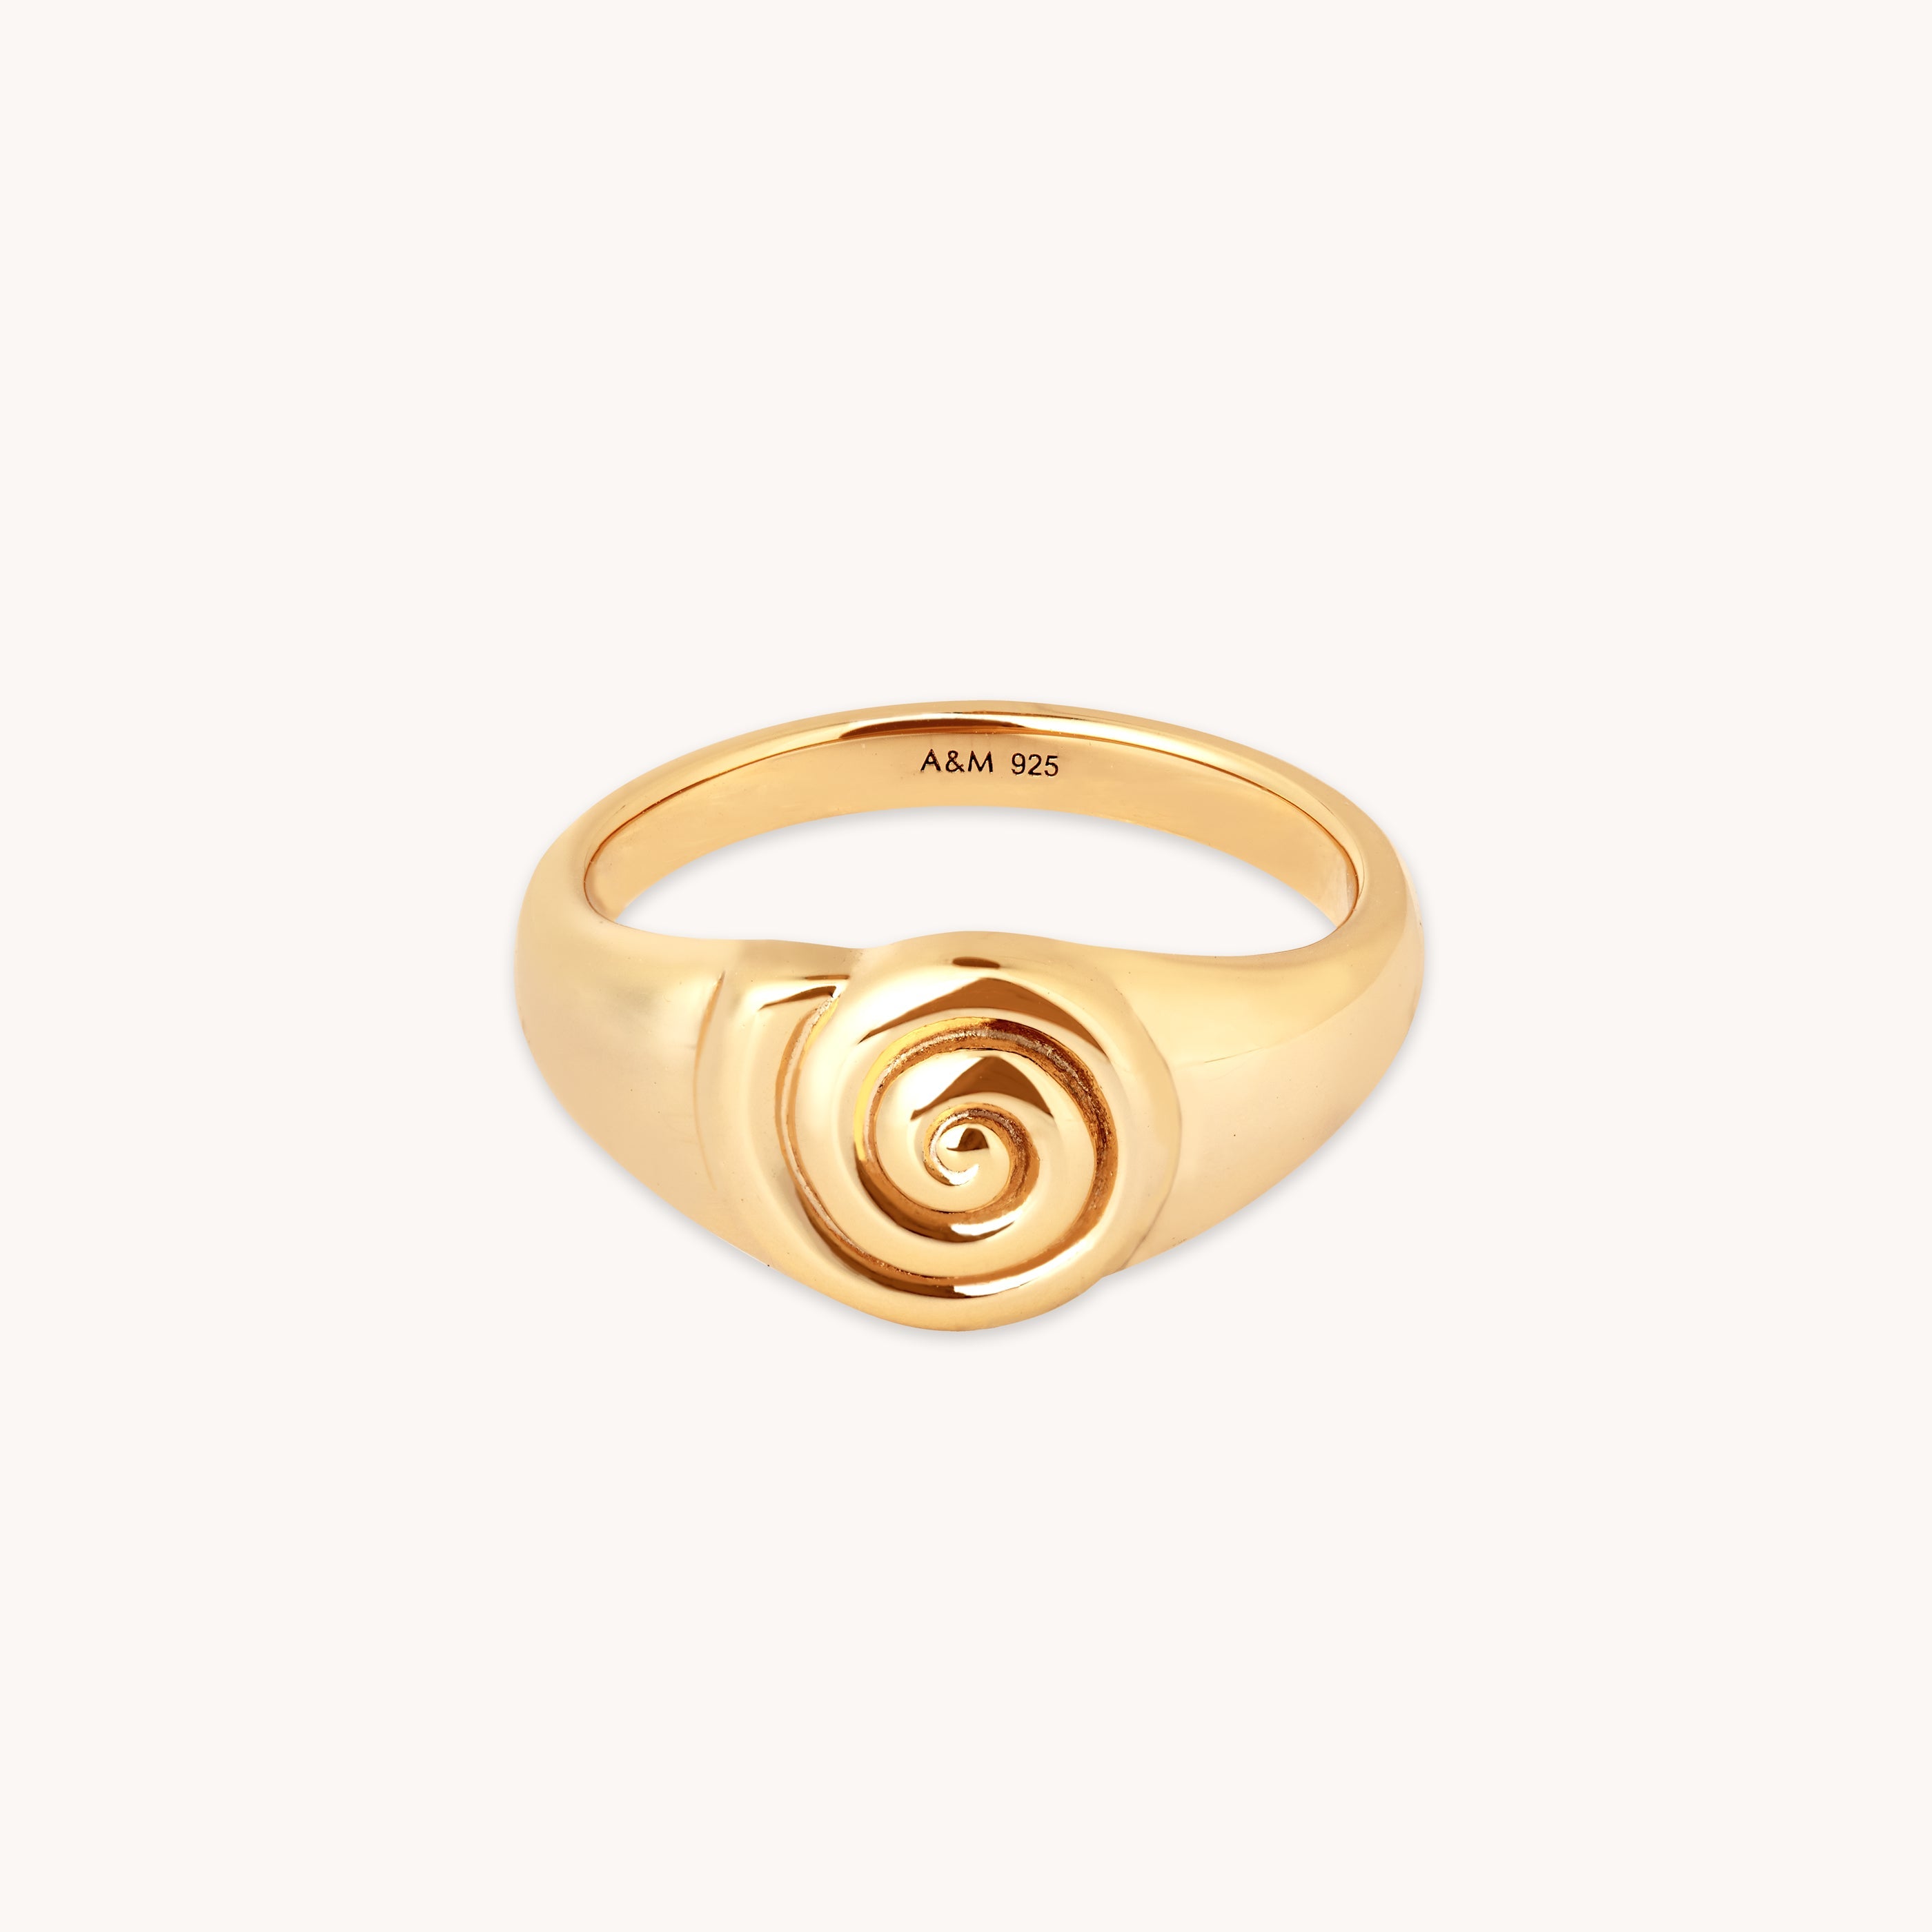 Shell Signet Ring in Gold